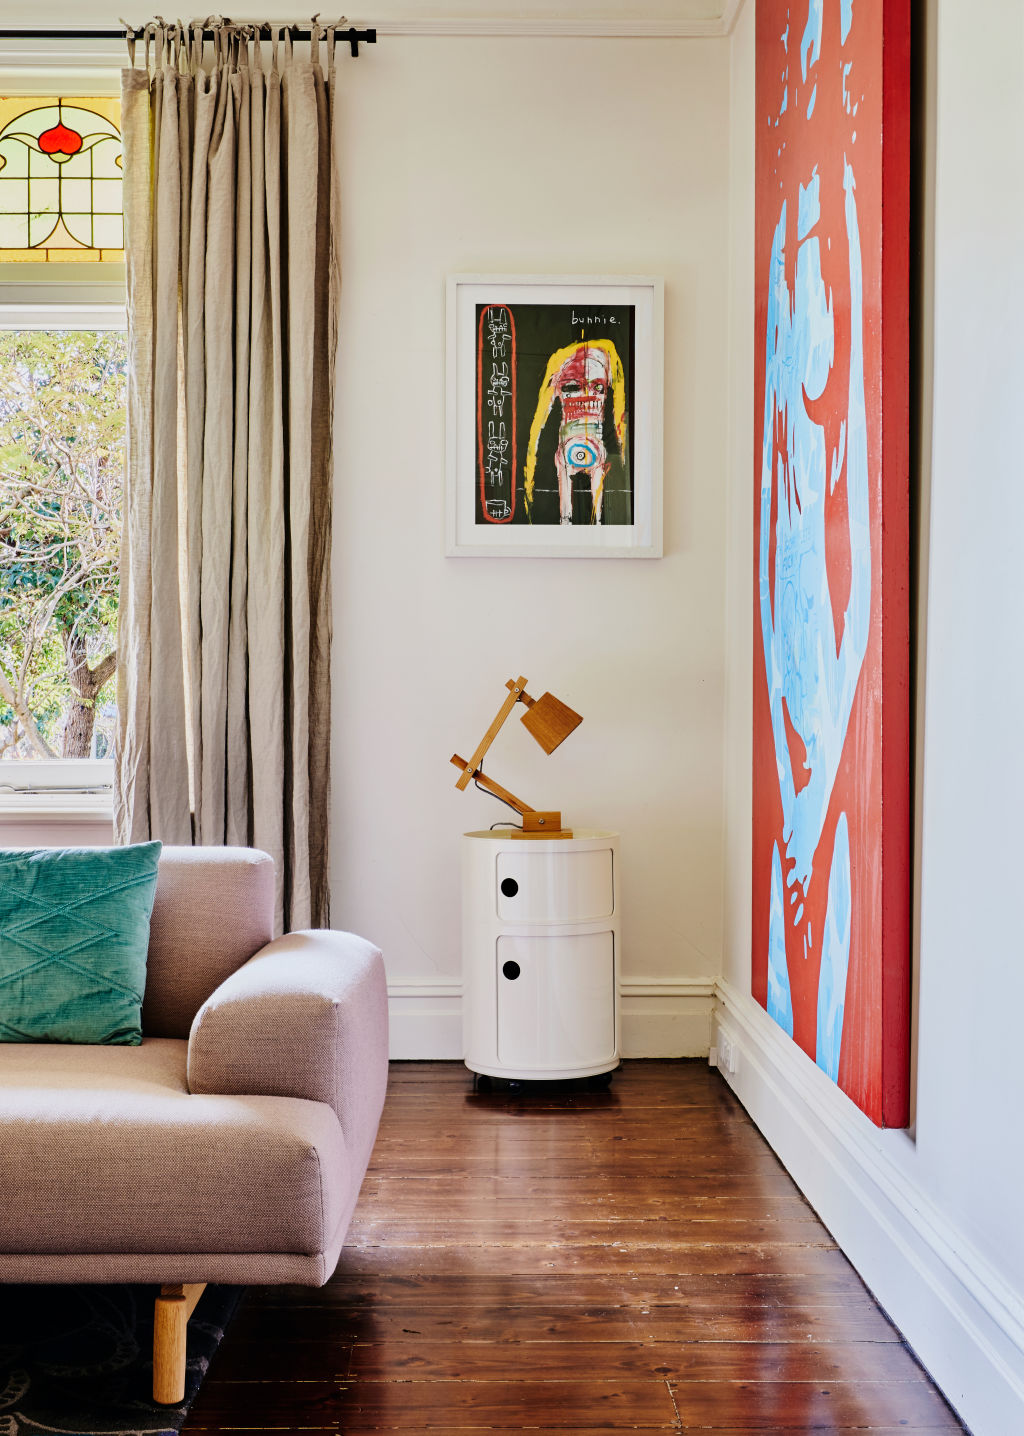 Hunt will go on passionate searches for particular items, and enjoys scouring garage sales as much as expensive interior magazines, to recreate looks on a budget. Photo: Amelia Stanwix Photography